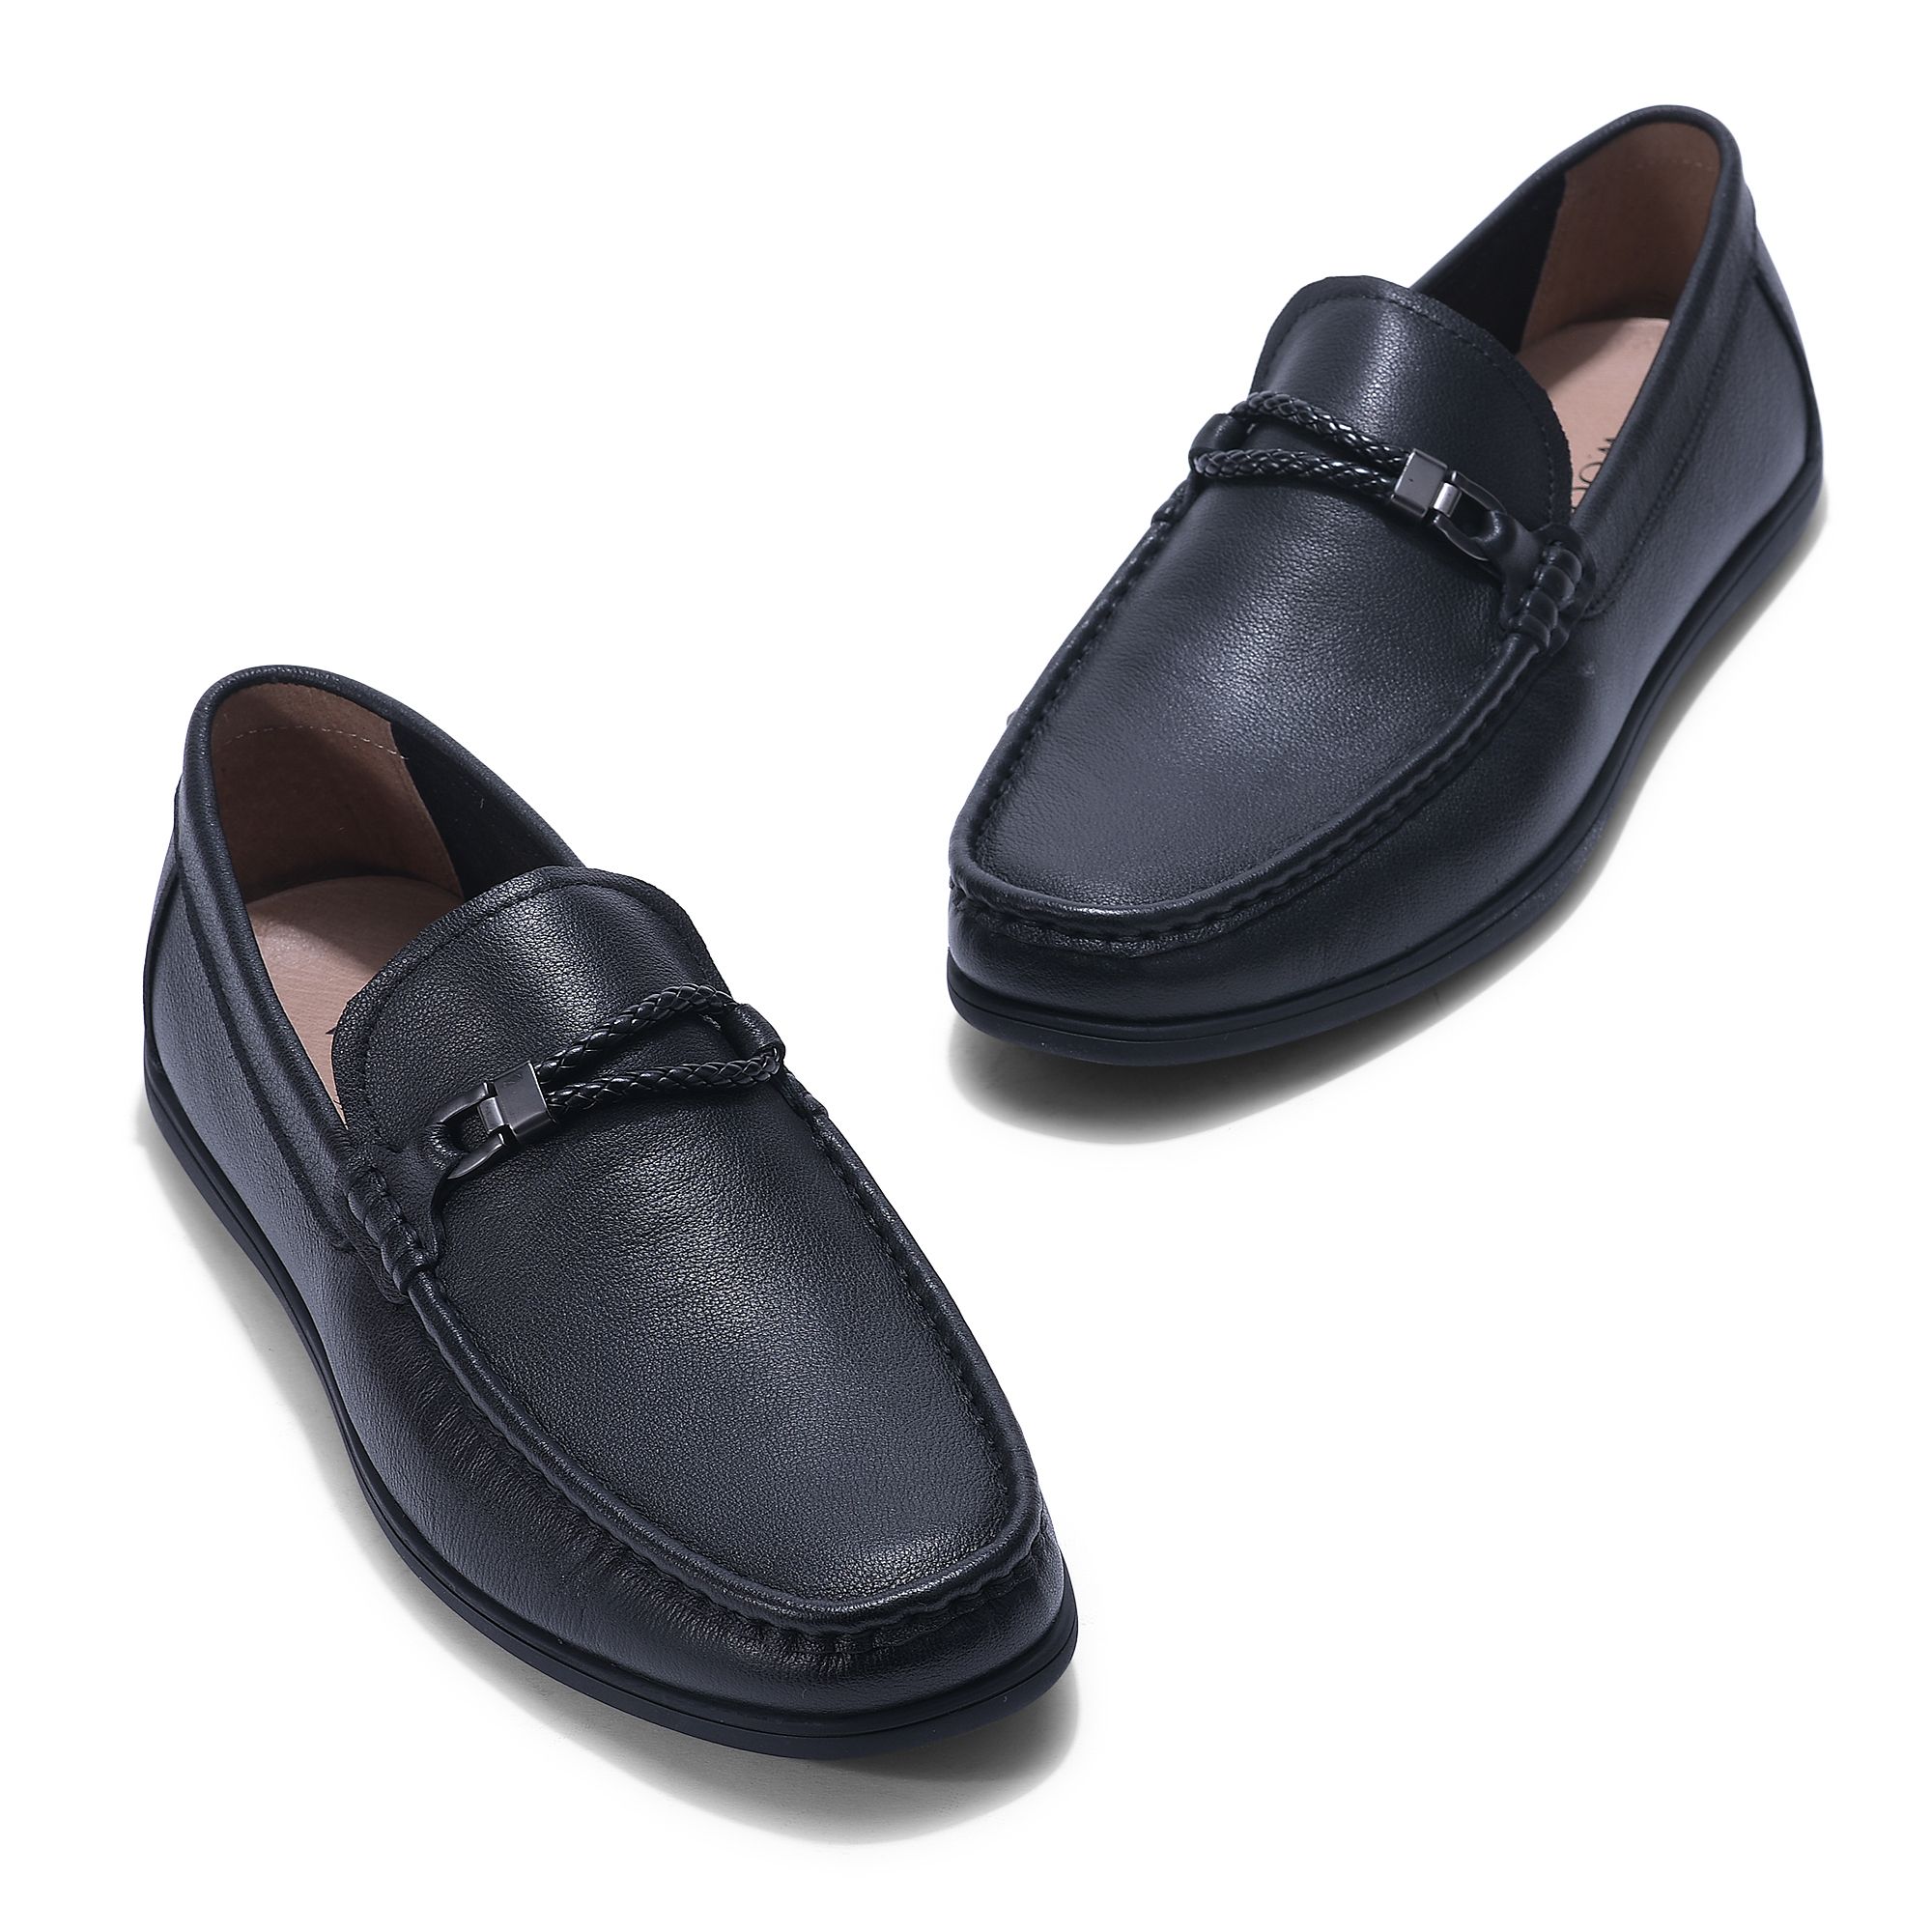 black loafer for men 4 247 mrp 8 495 50 % off prices include taxes ...